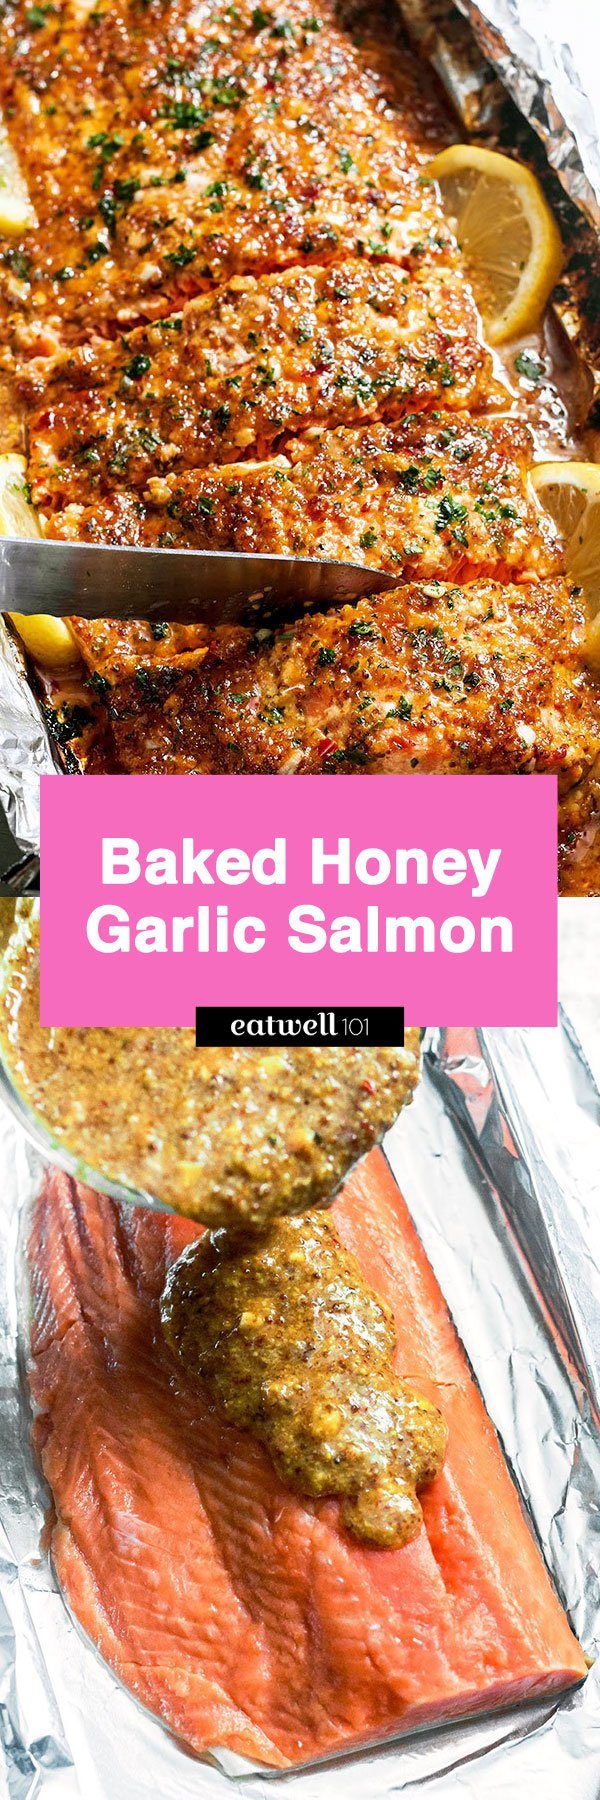 Baked Honey Garlic Salmon Recipe – #eatwell101 #recipe – Easiest salmon recipe ever! Quick, easy with zero clean-up!